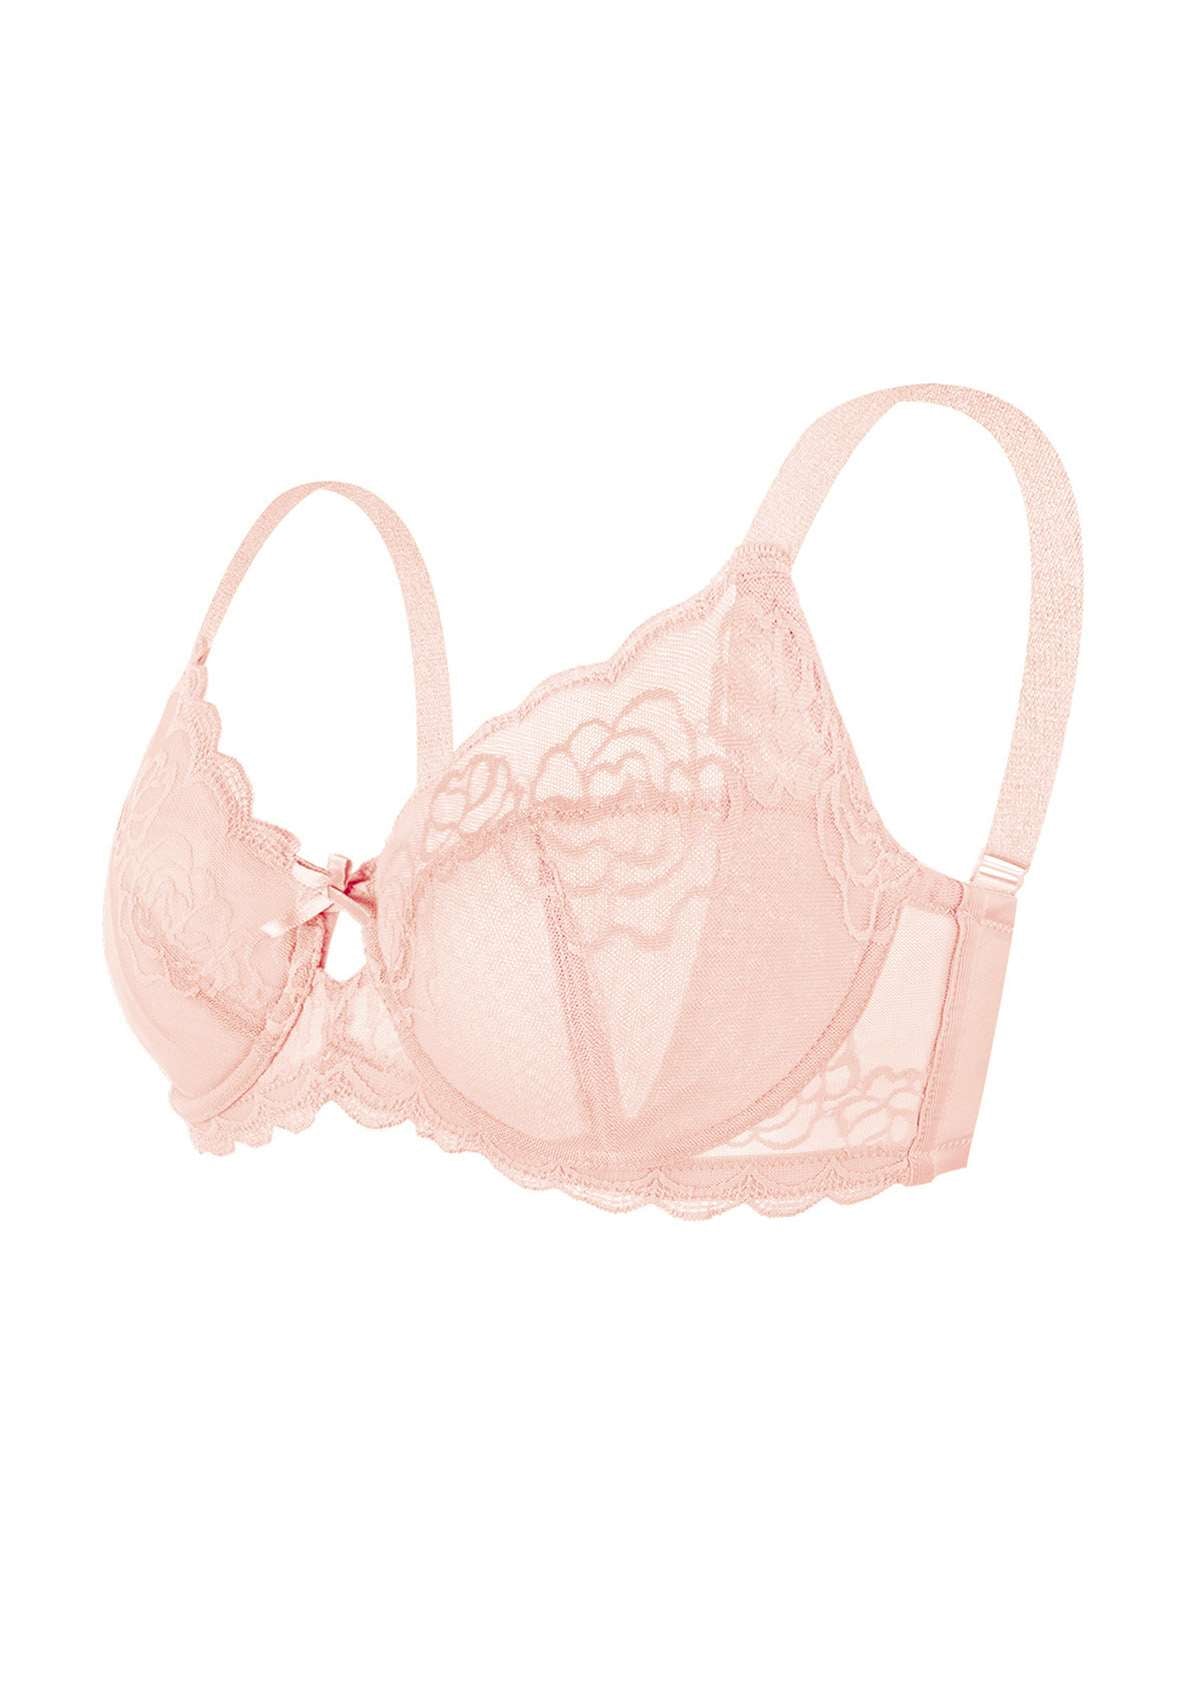 HSIA Rosa Bonica Sheer Lace Mesh Unlined Thin Comfy Woman Bra - Pink / 36 / DDD/F